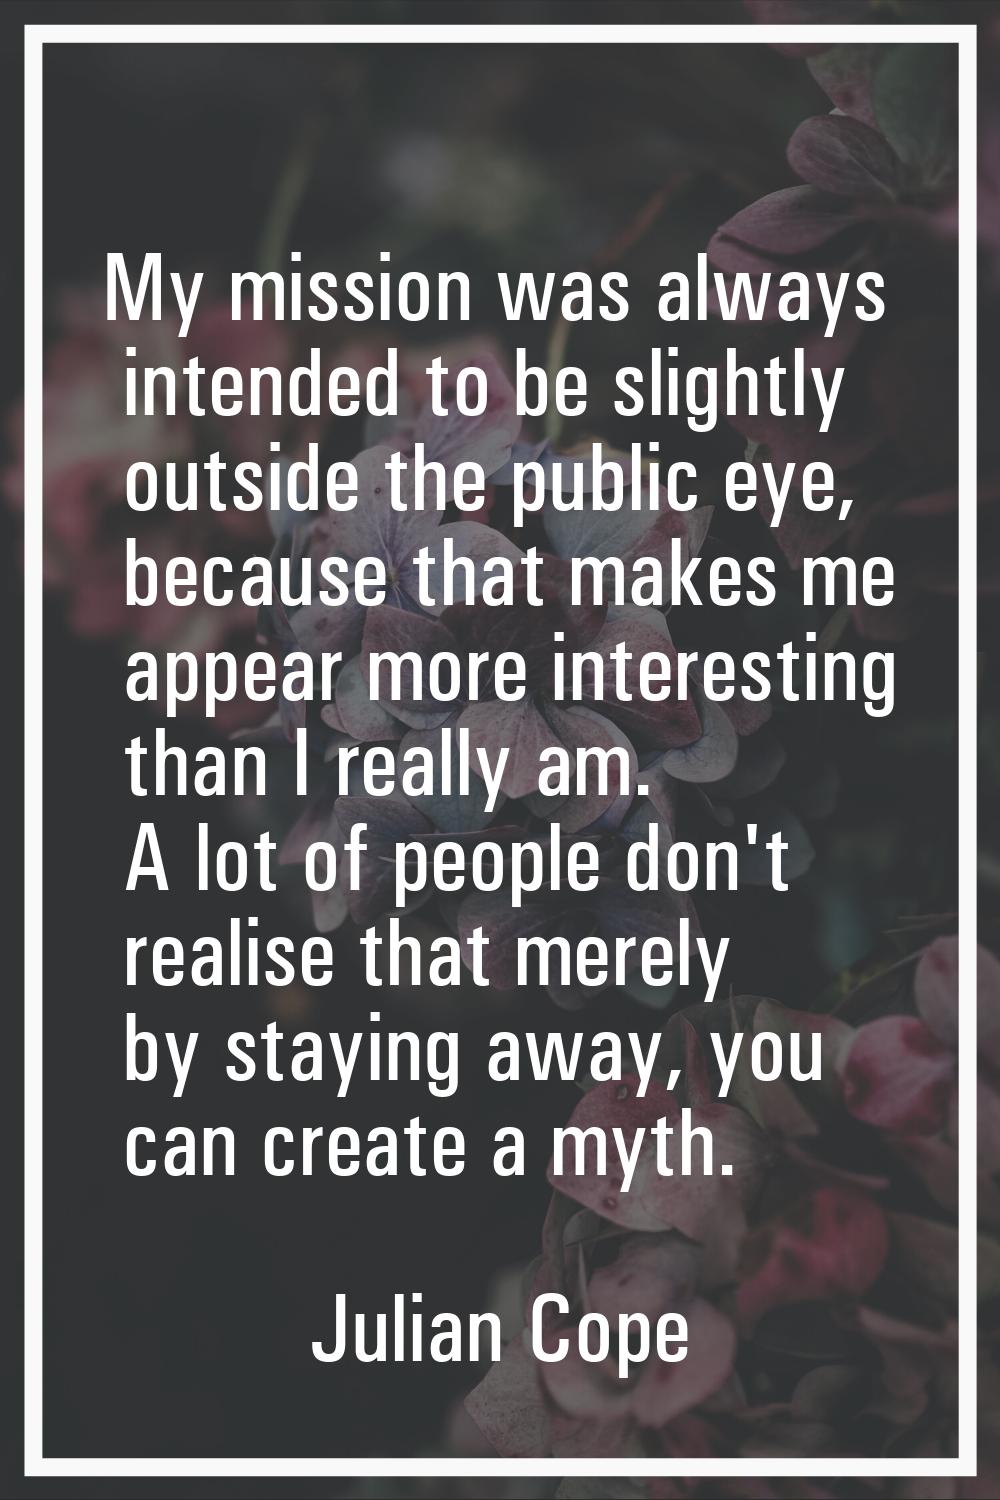 My mission was always intended to be slightly outside the public eye, because that makes me appear 